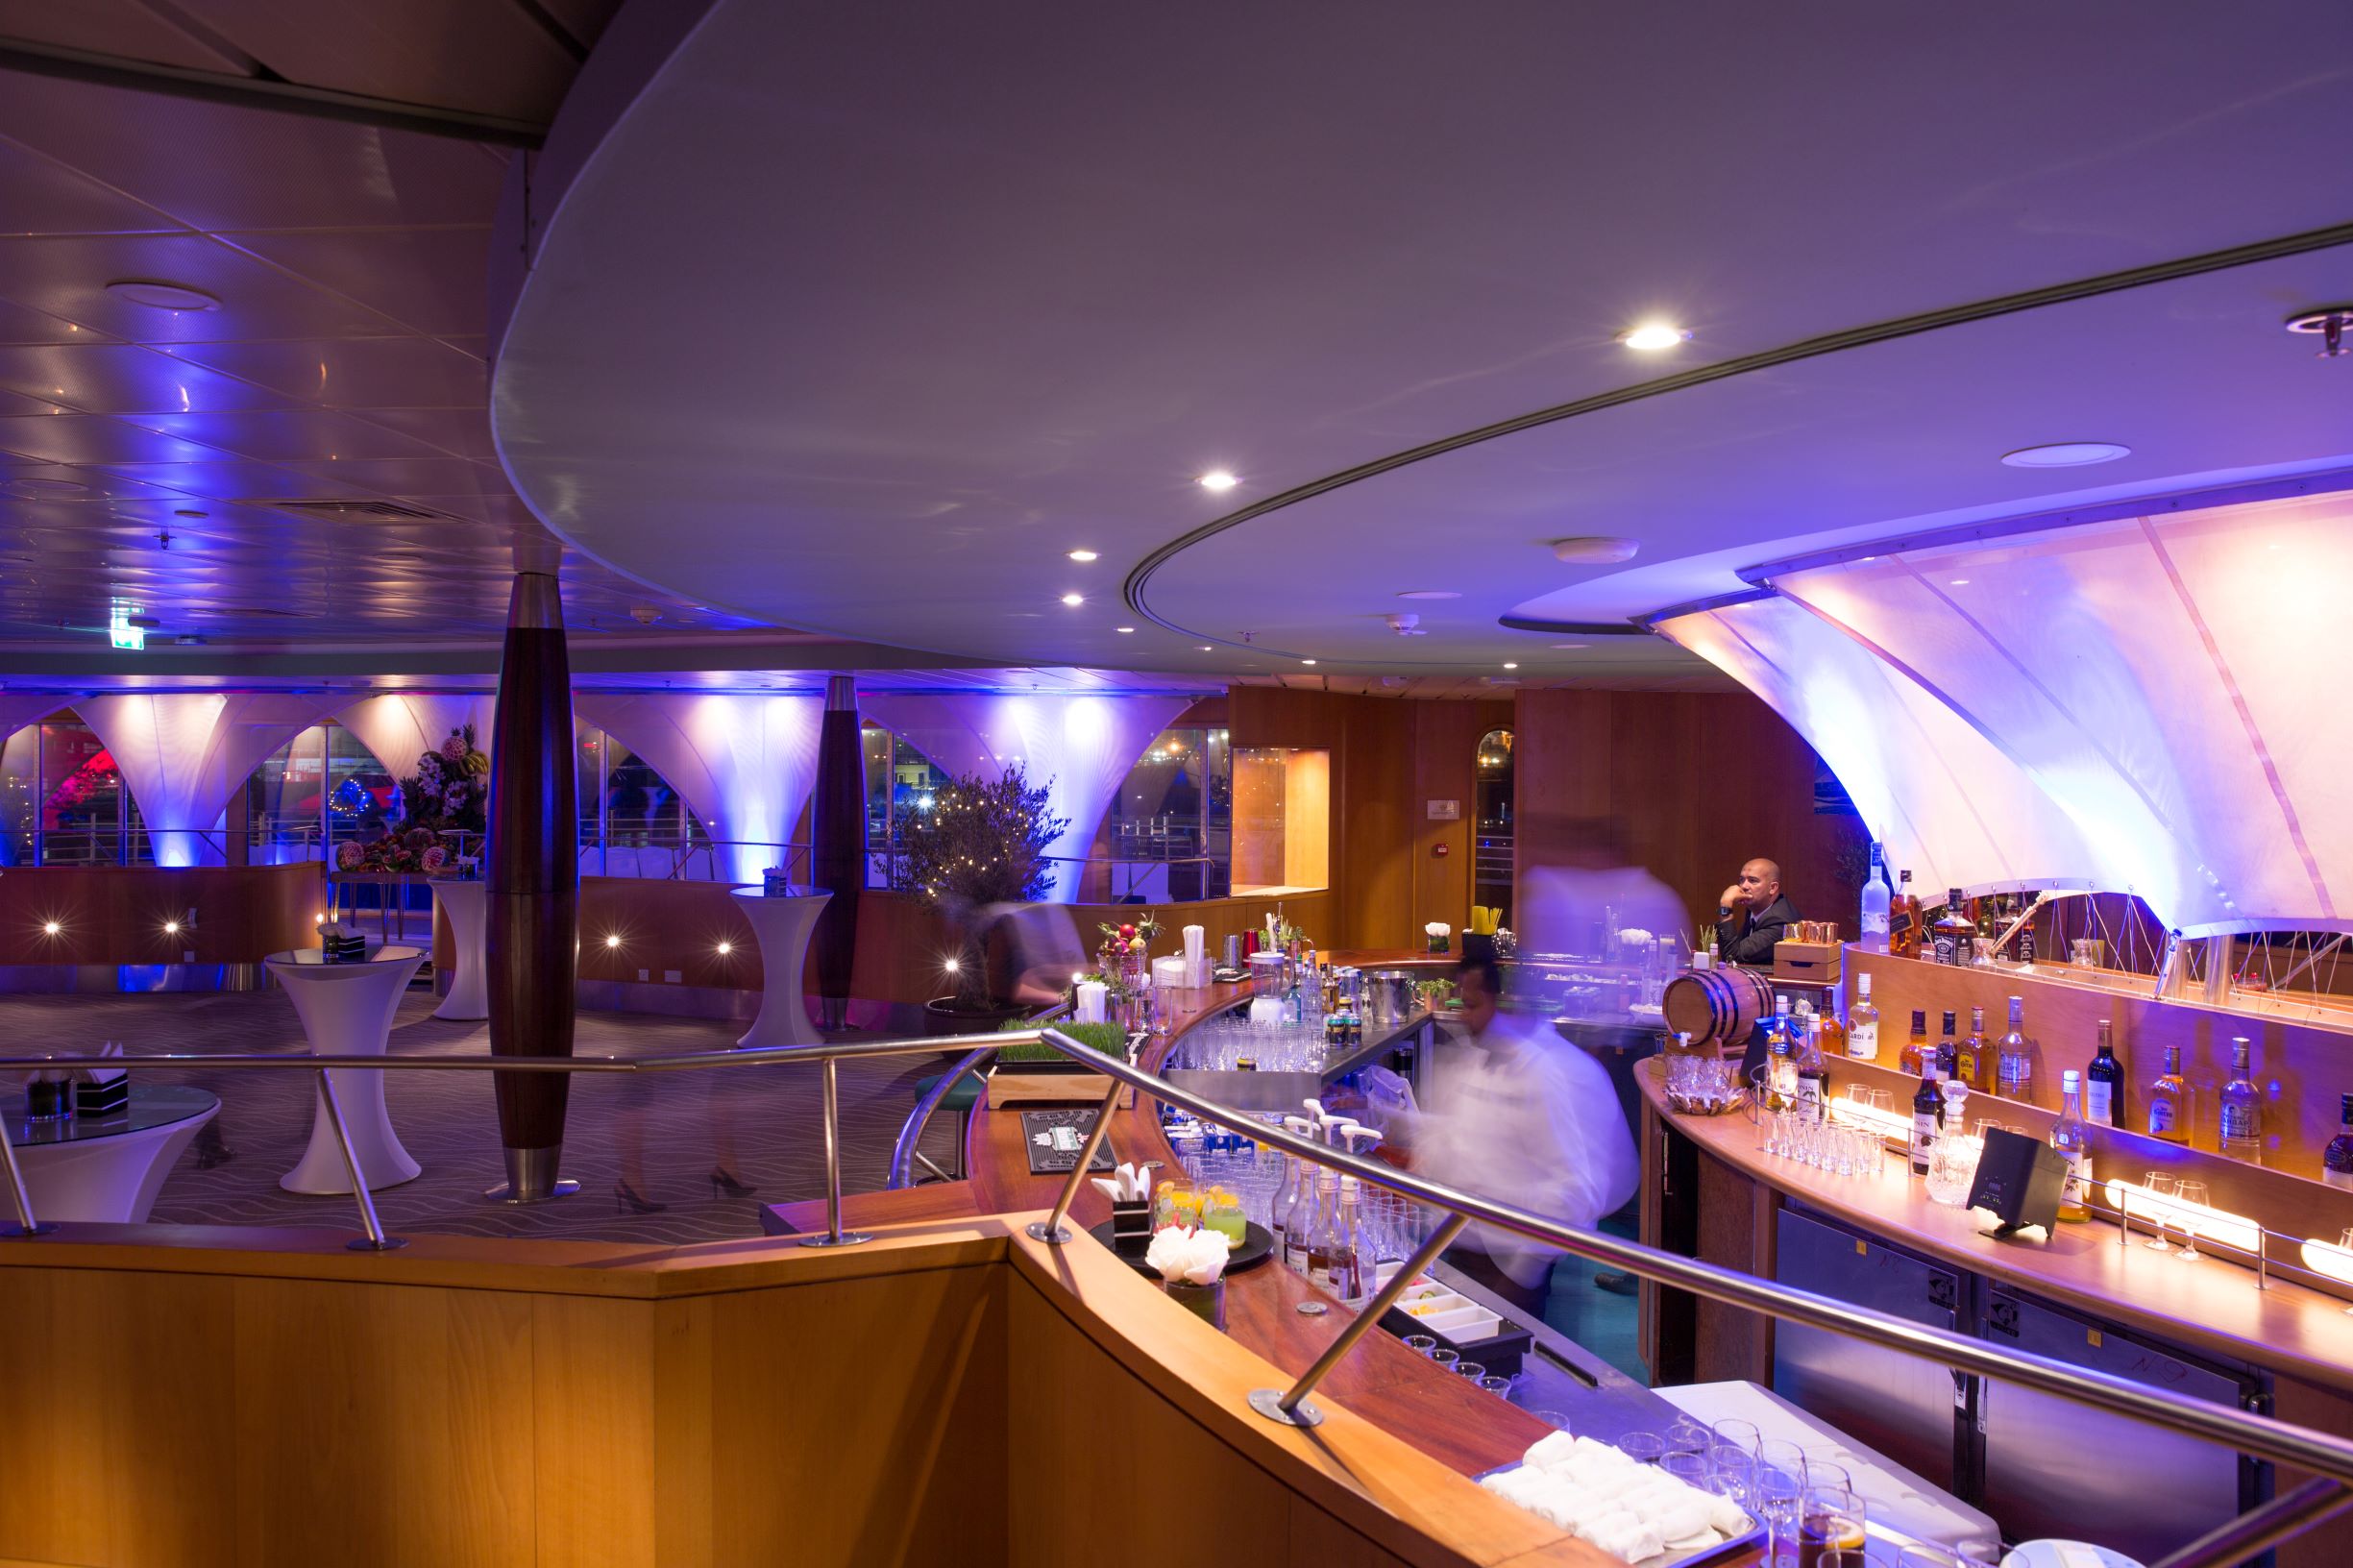 The Yacht Club on board QE2 (PCFC Hotels/PA)